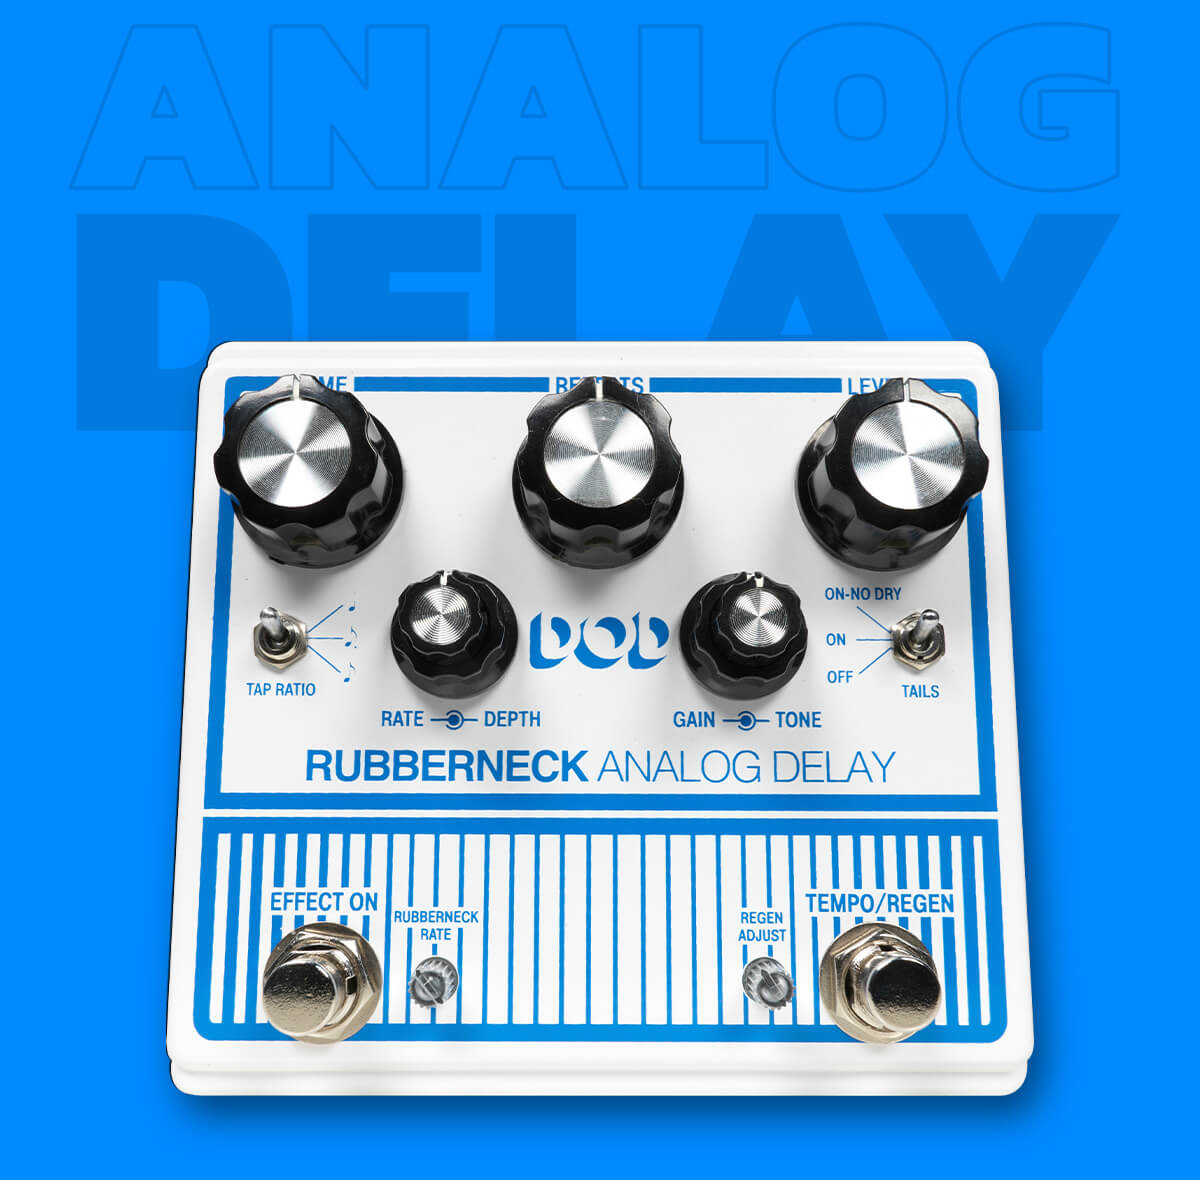 DOD Rubberneck analog delay in white with blue graphics, blue background that says 